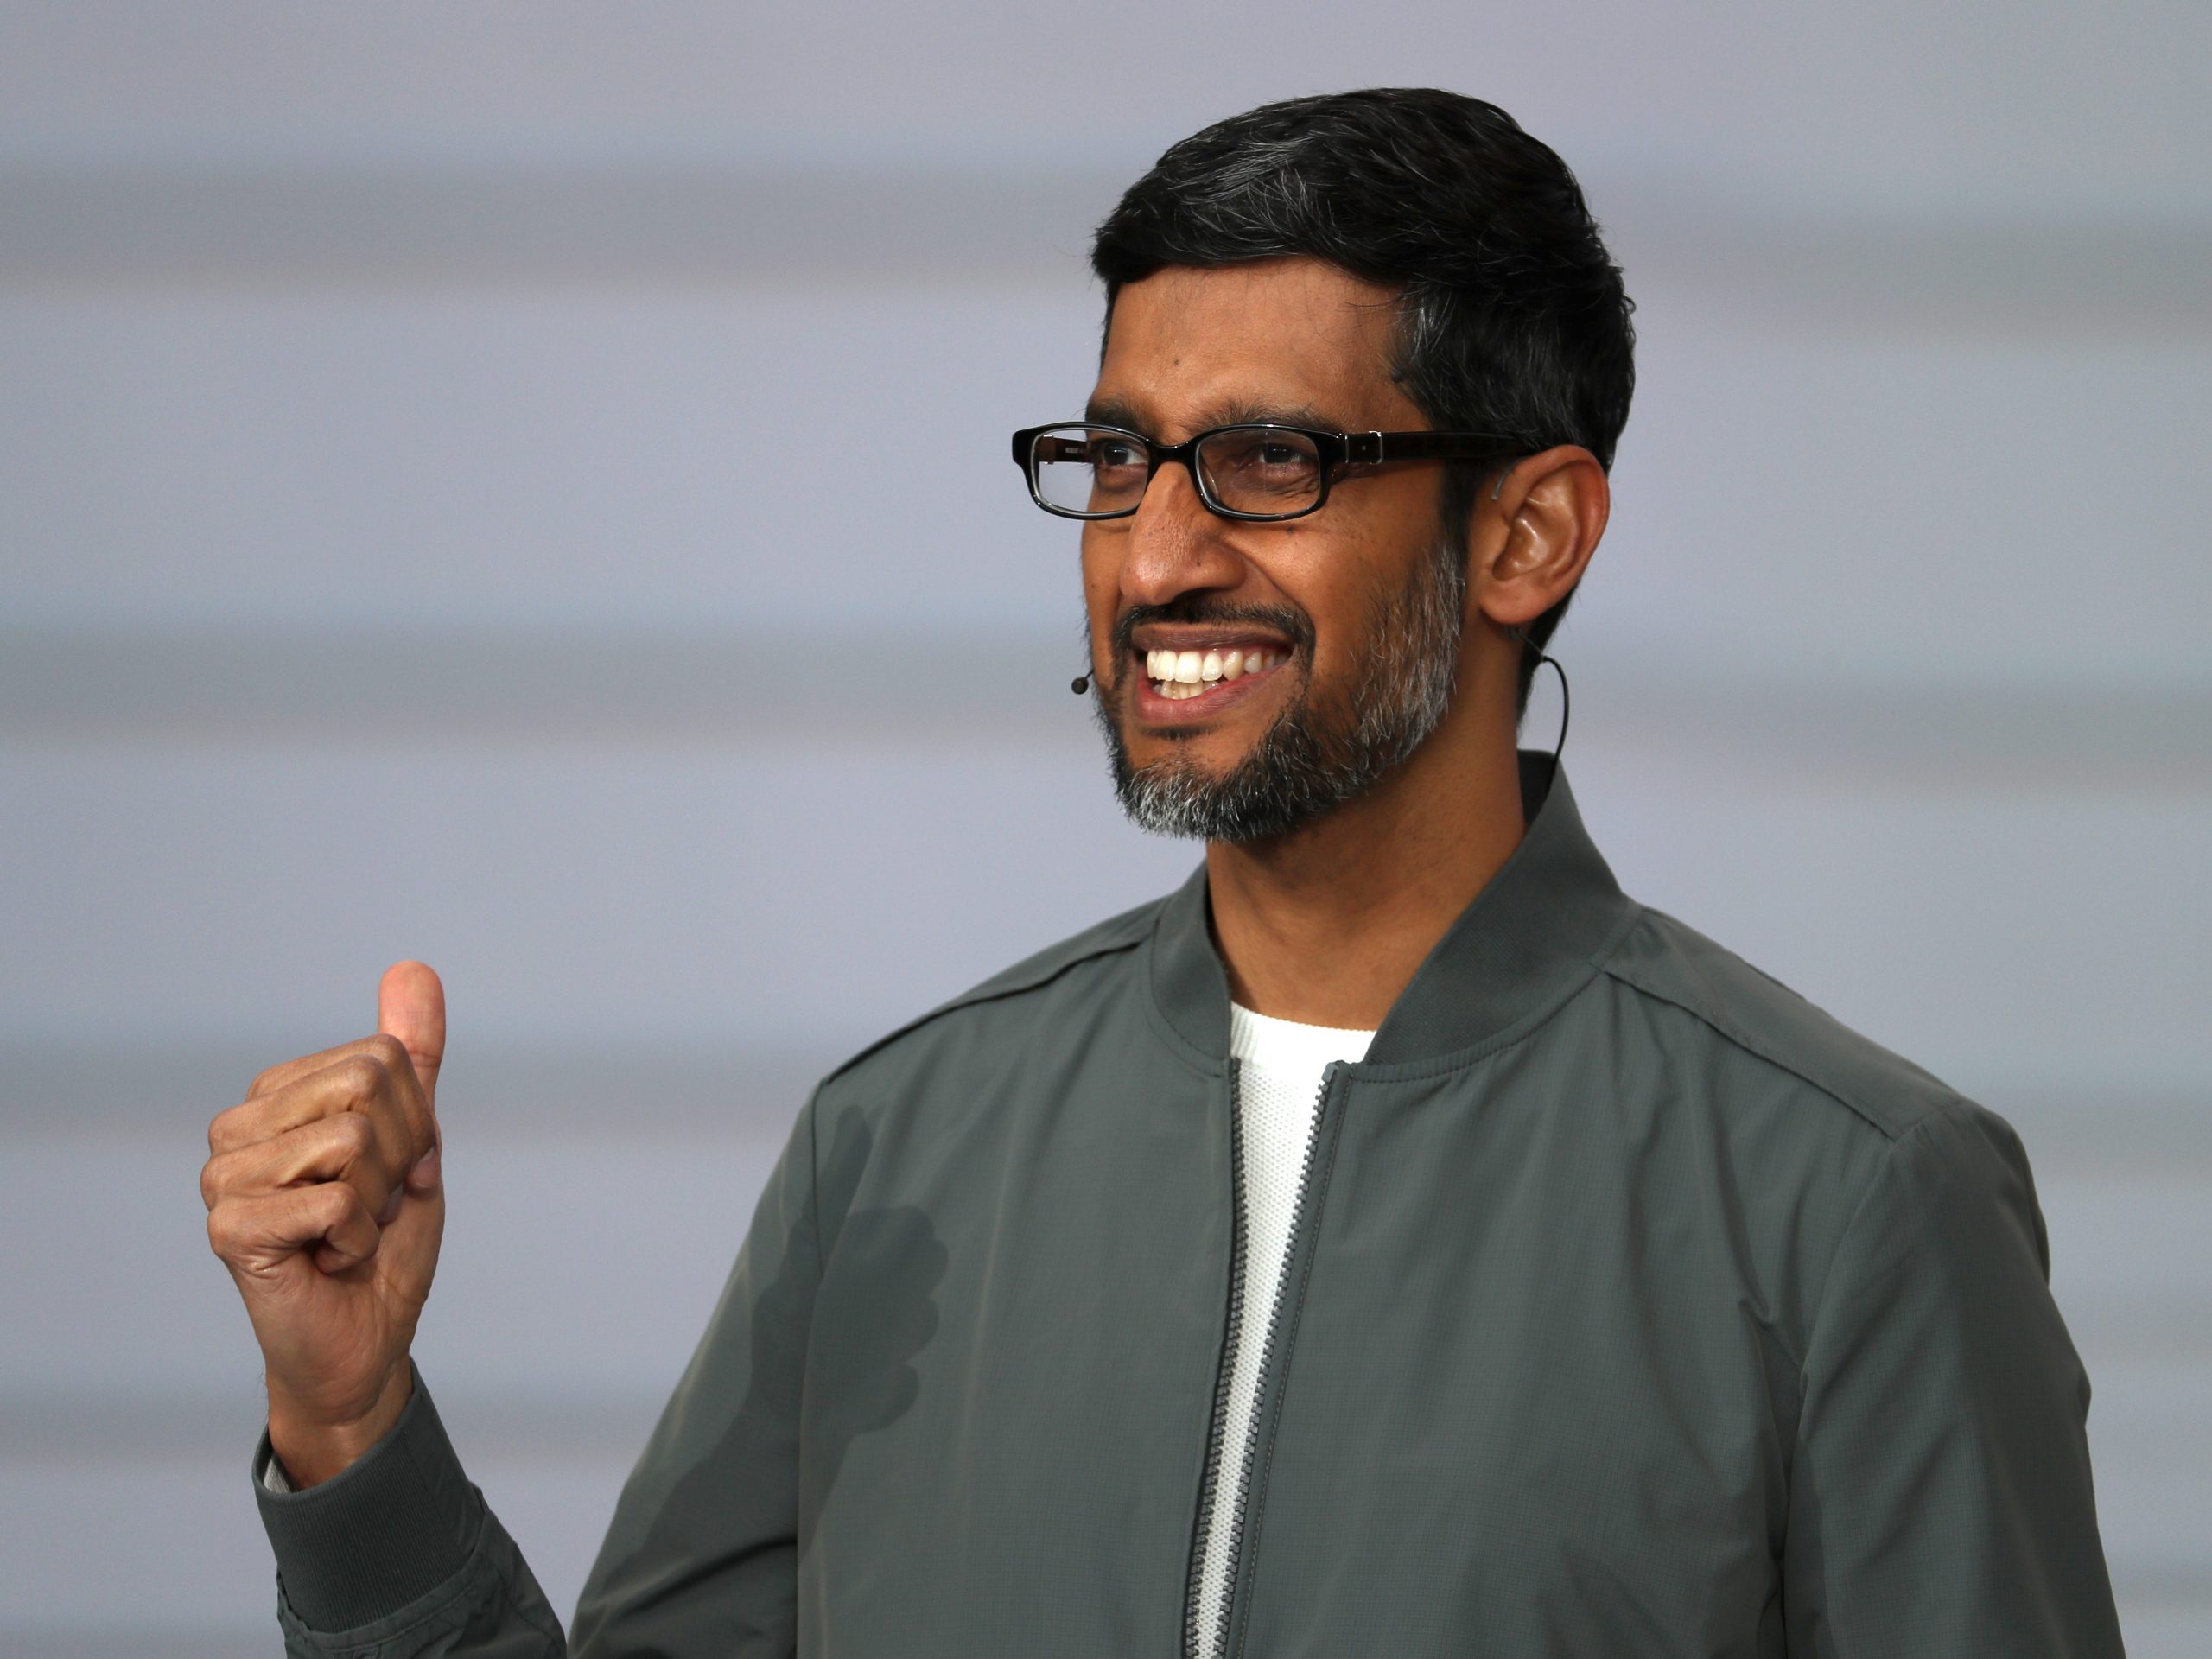 Sundar Pichai wears a grey jacket over a white t-shirt and smiles on stage.